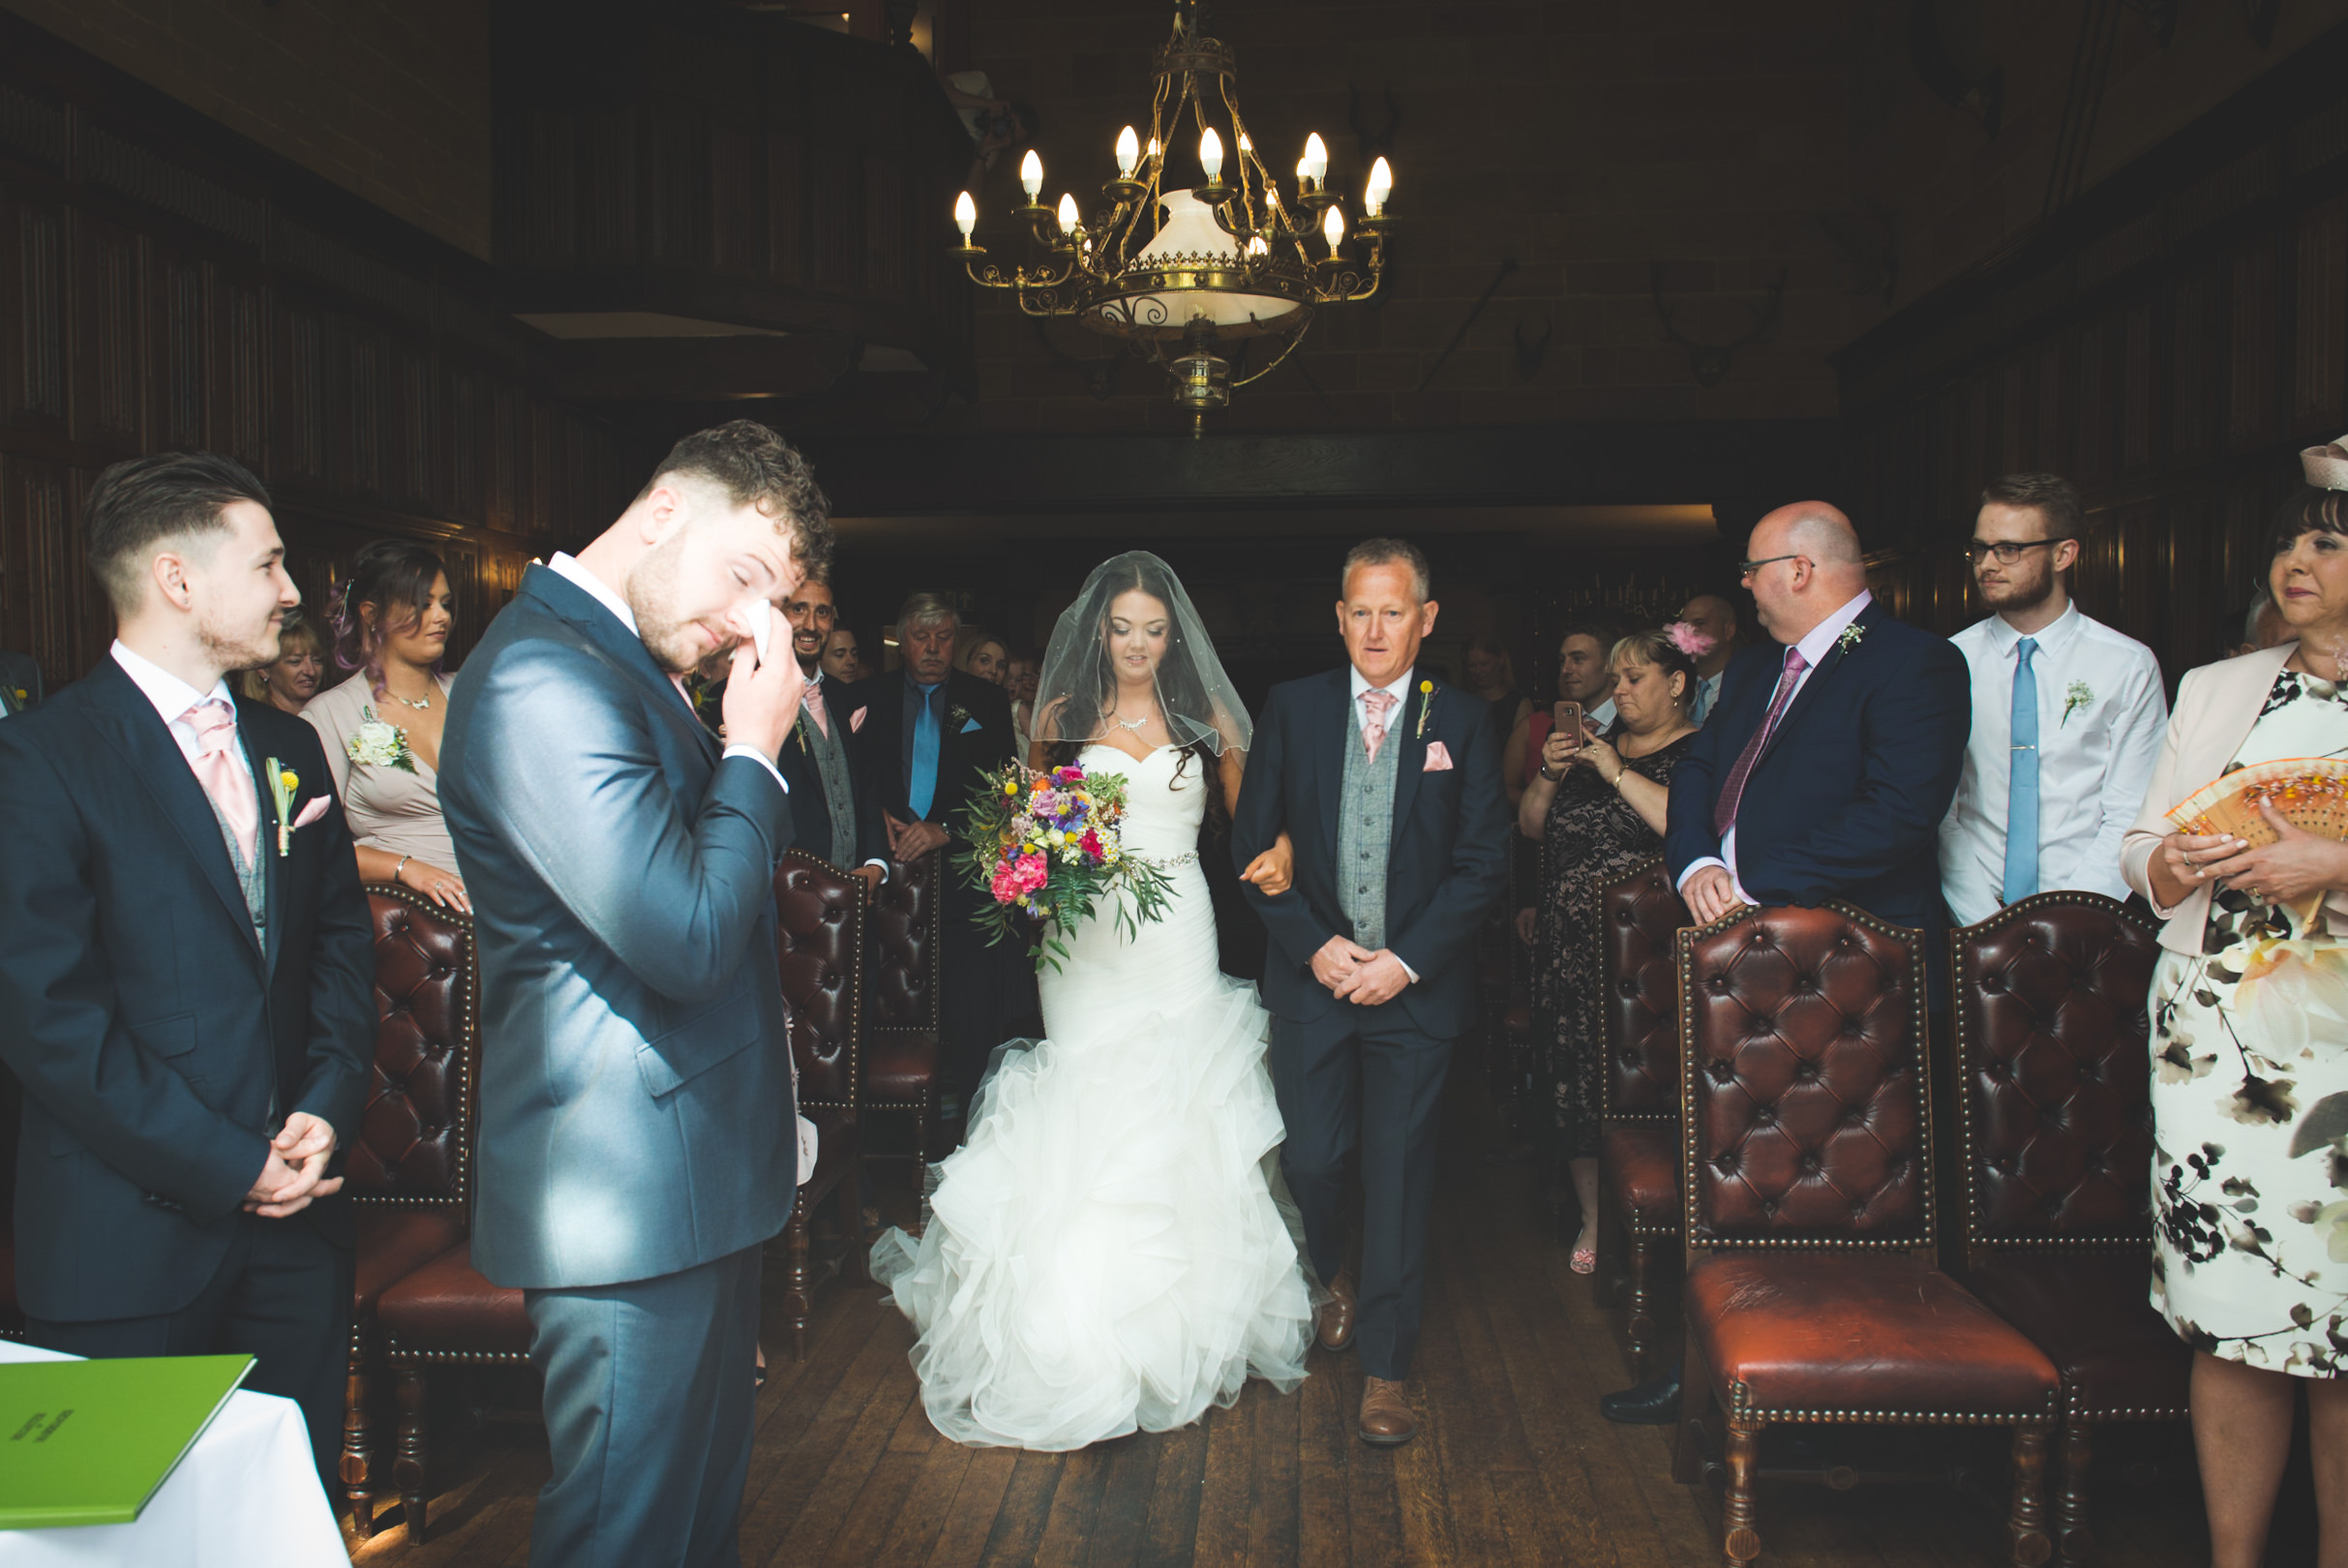 a tear for the groom, walking down the aisle, wedding photography